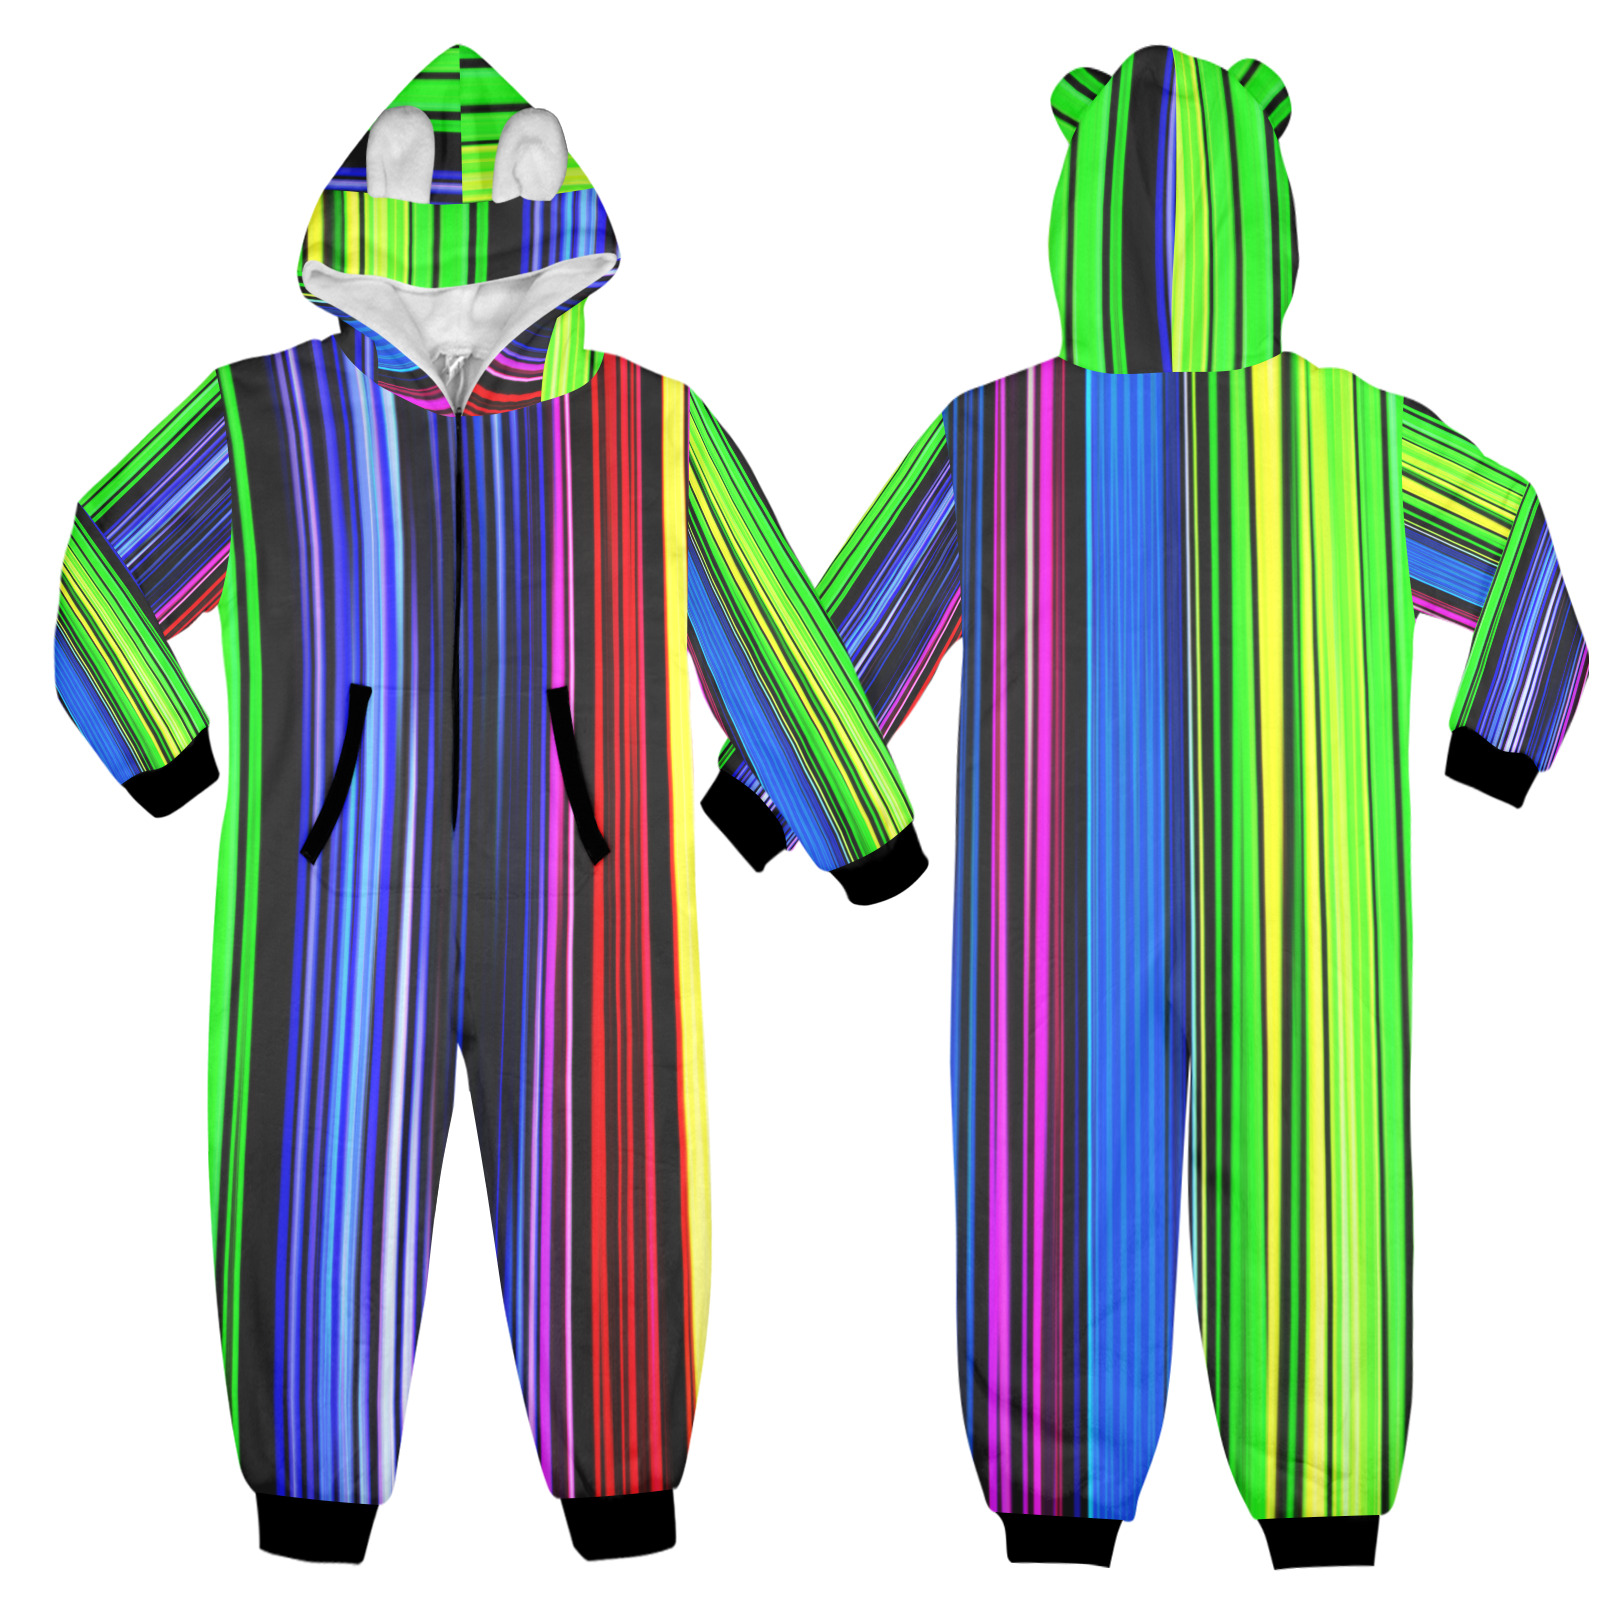 A Rainbow Of Stripes One-Piece Zip Up Hooded Pajamas for Big Kids